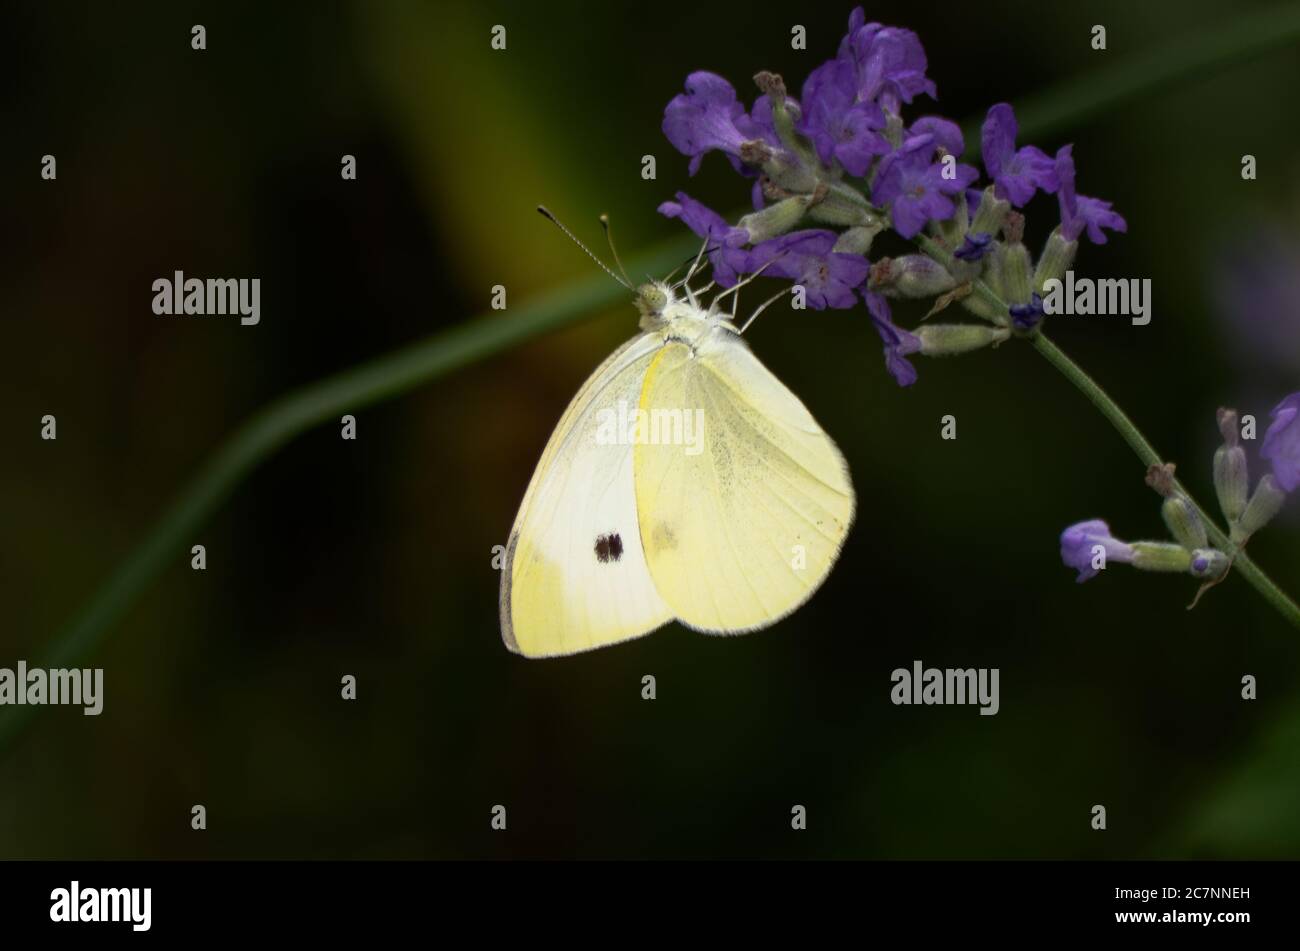 Cabbage White (Pieris rapae) butterfly at a lavender flower, dark background Stock Photo